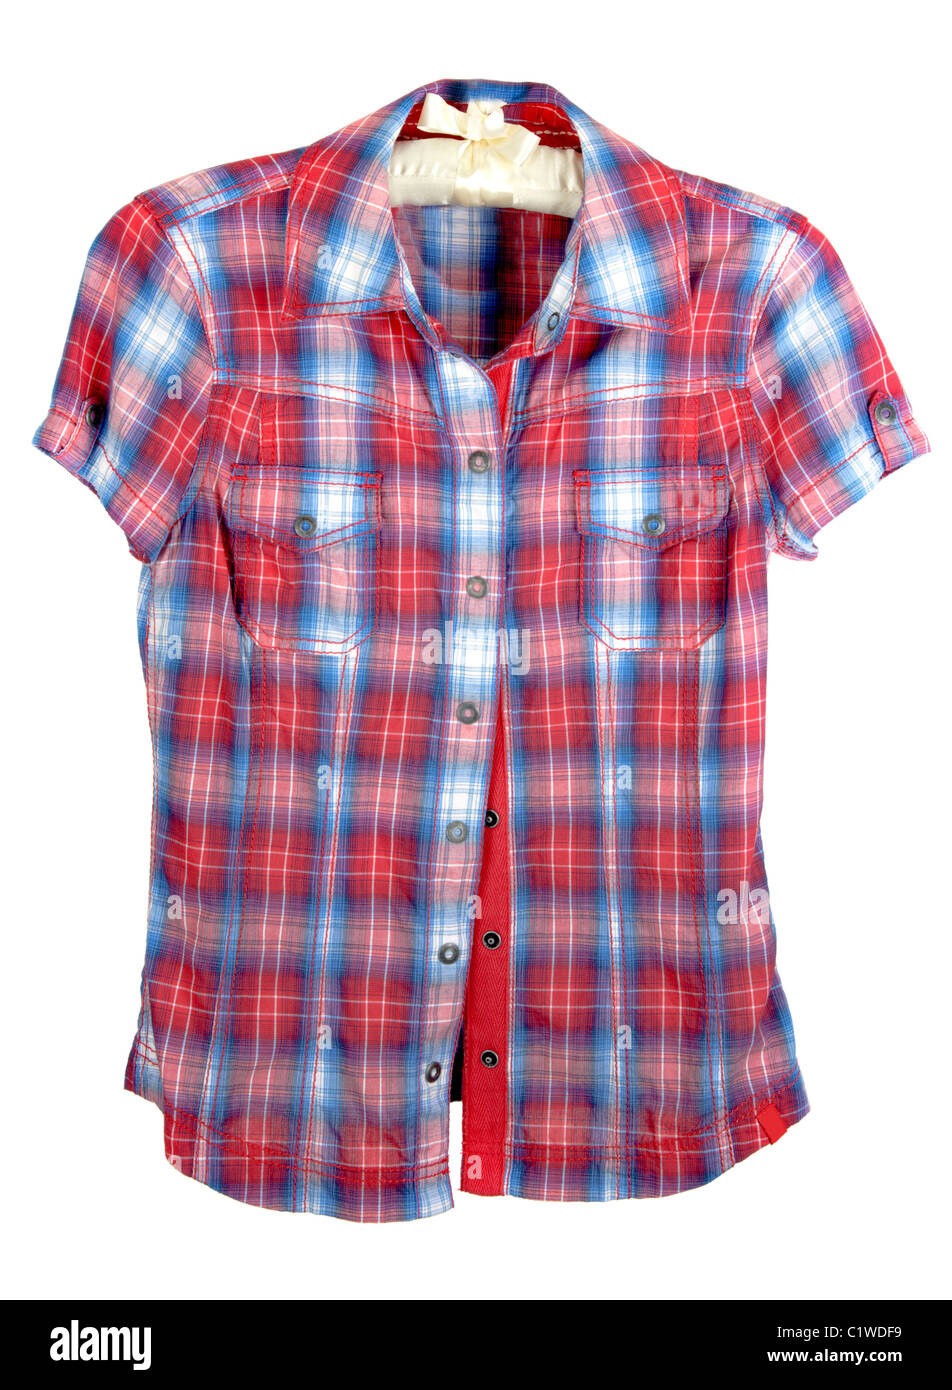 Plaid shirt with red and blue band on white background Stock Photo